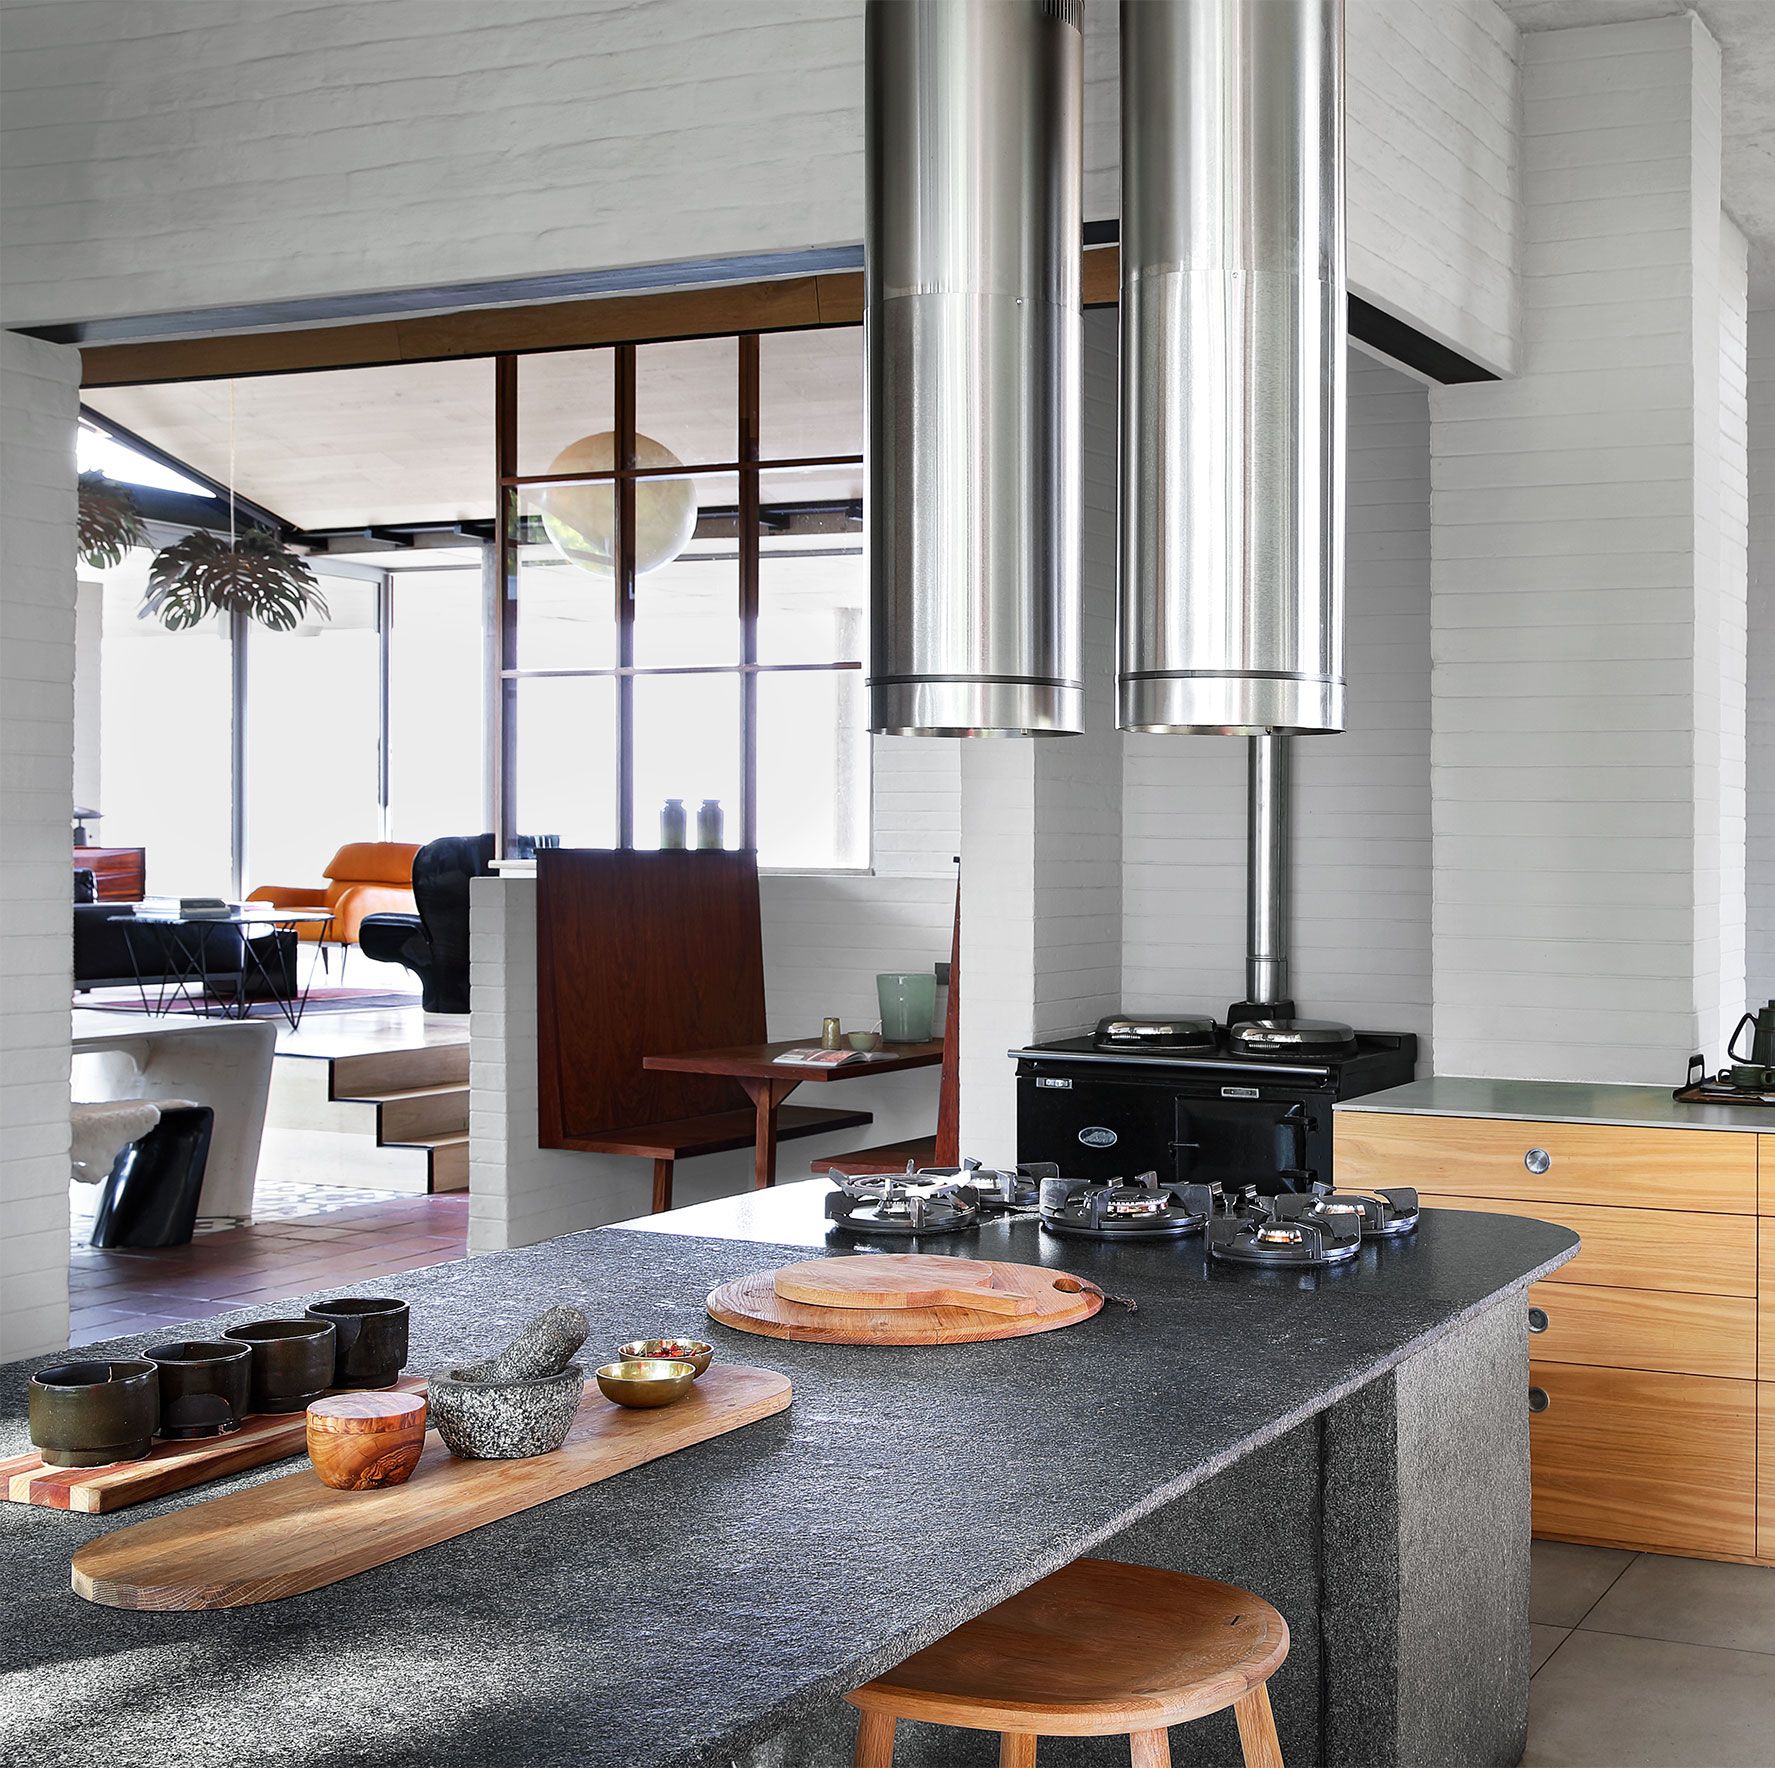 55+ Thoroughly Modern Kitchens We Can't Stop Swooning Over